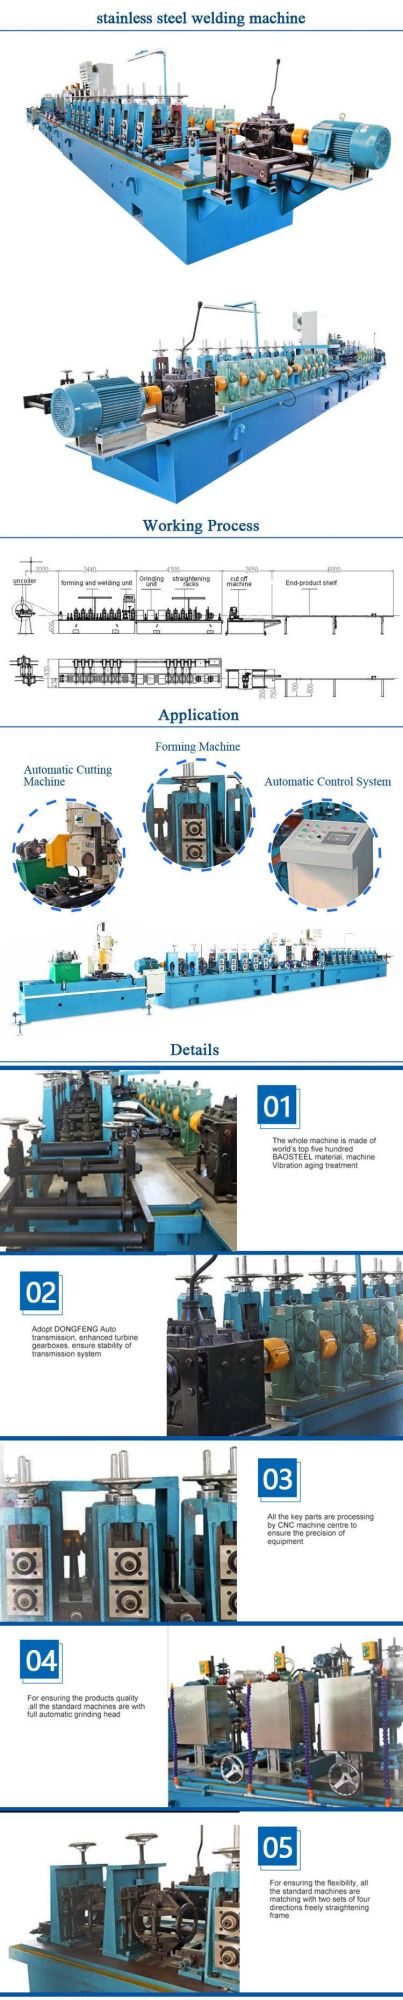 Automatic Welded Steel Pipe Production Line/ERW Tube Mill Machine